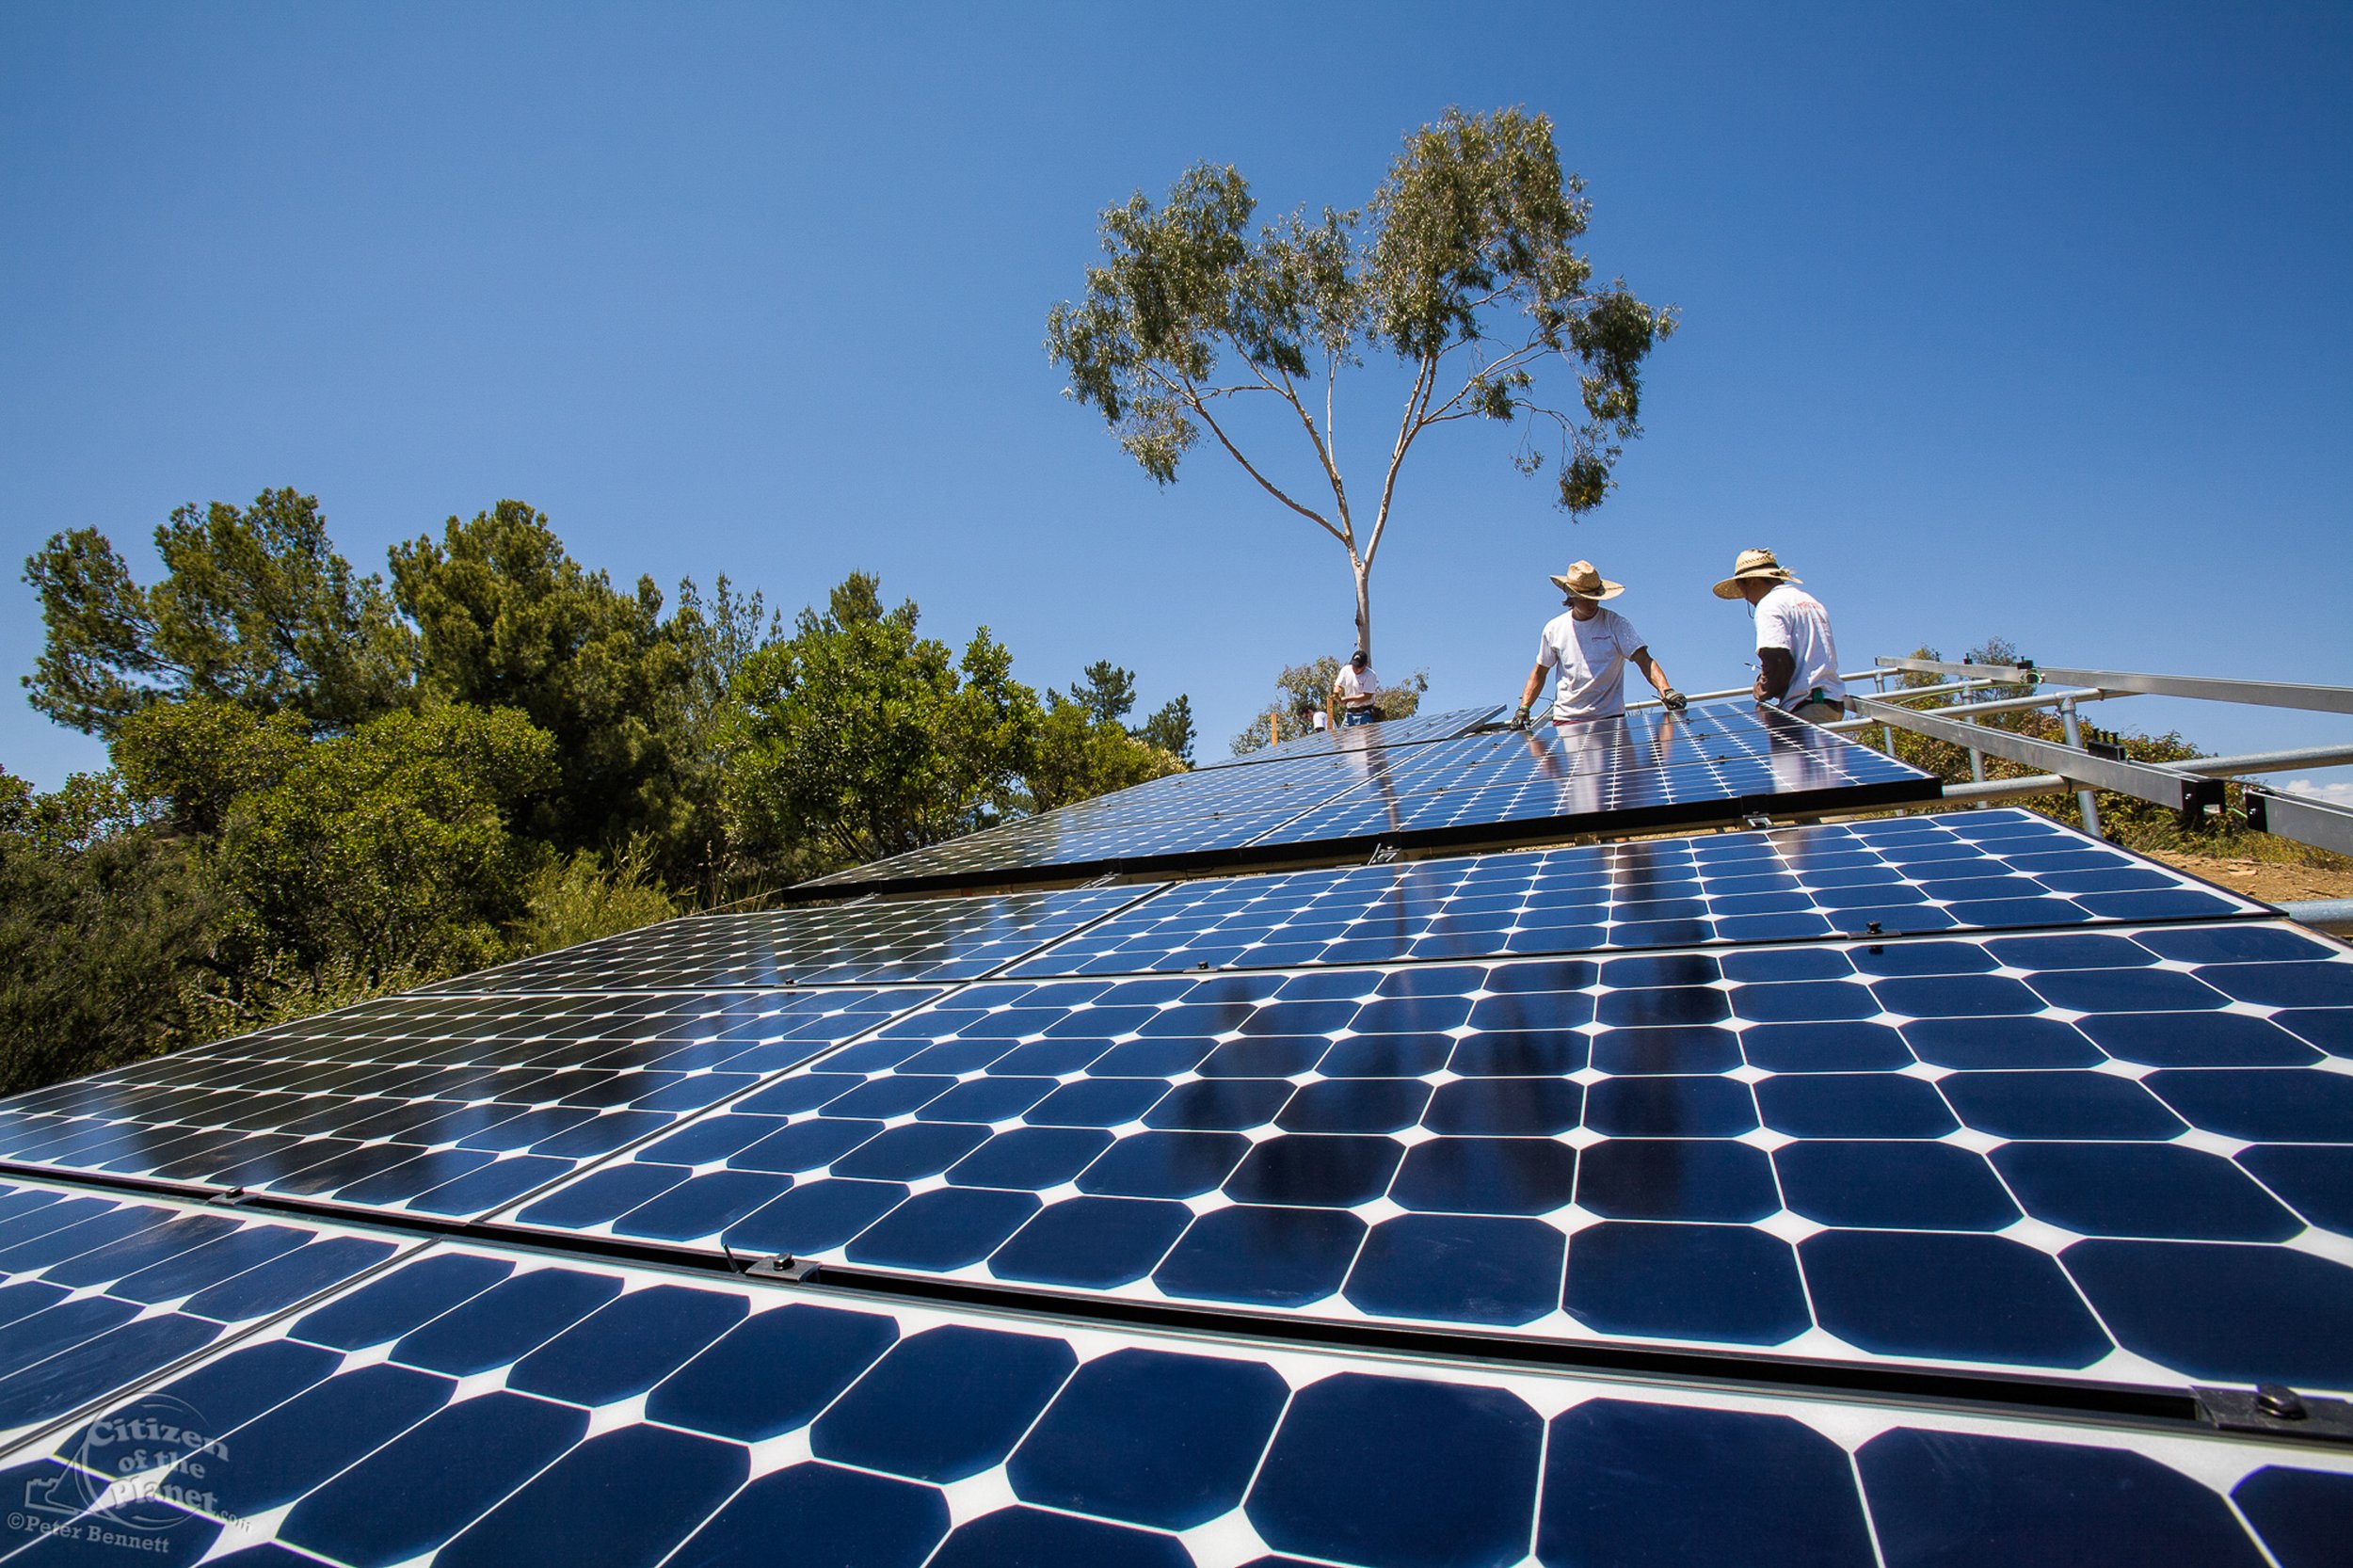 solution-to-the-rooftop-solar-vs-big-utility-solar-question-remains